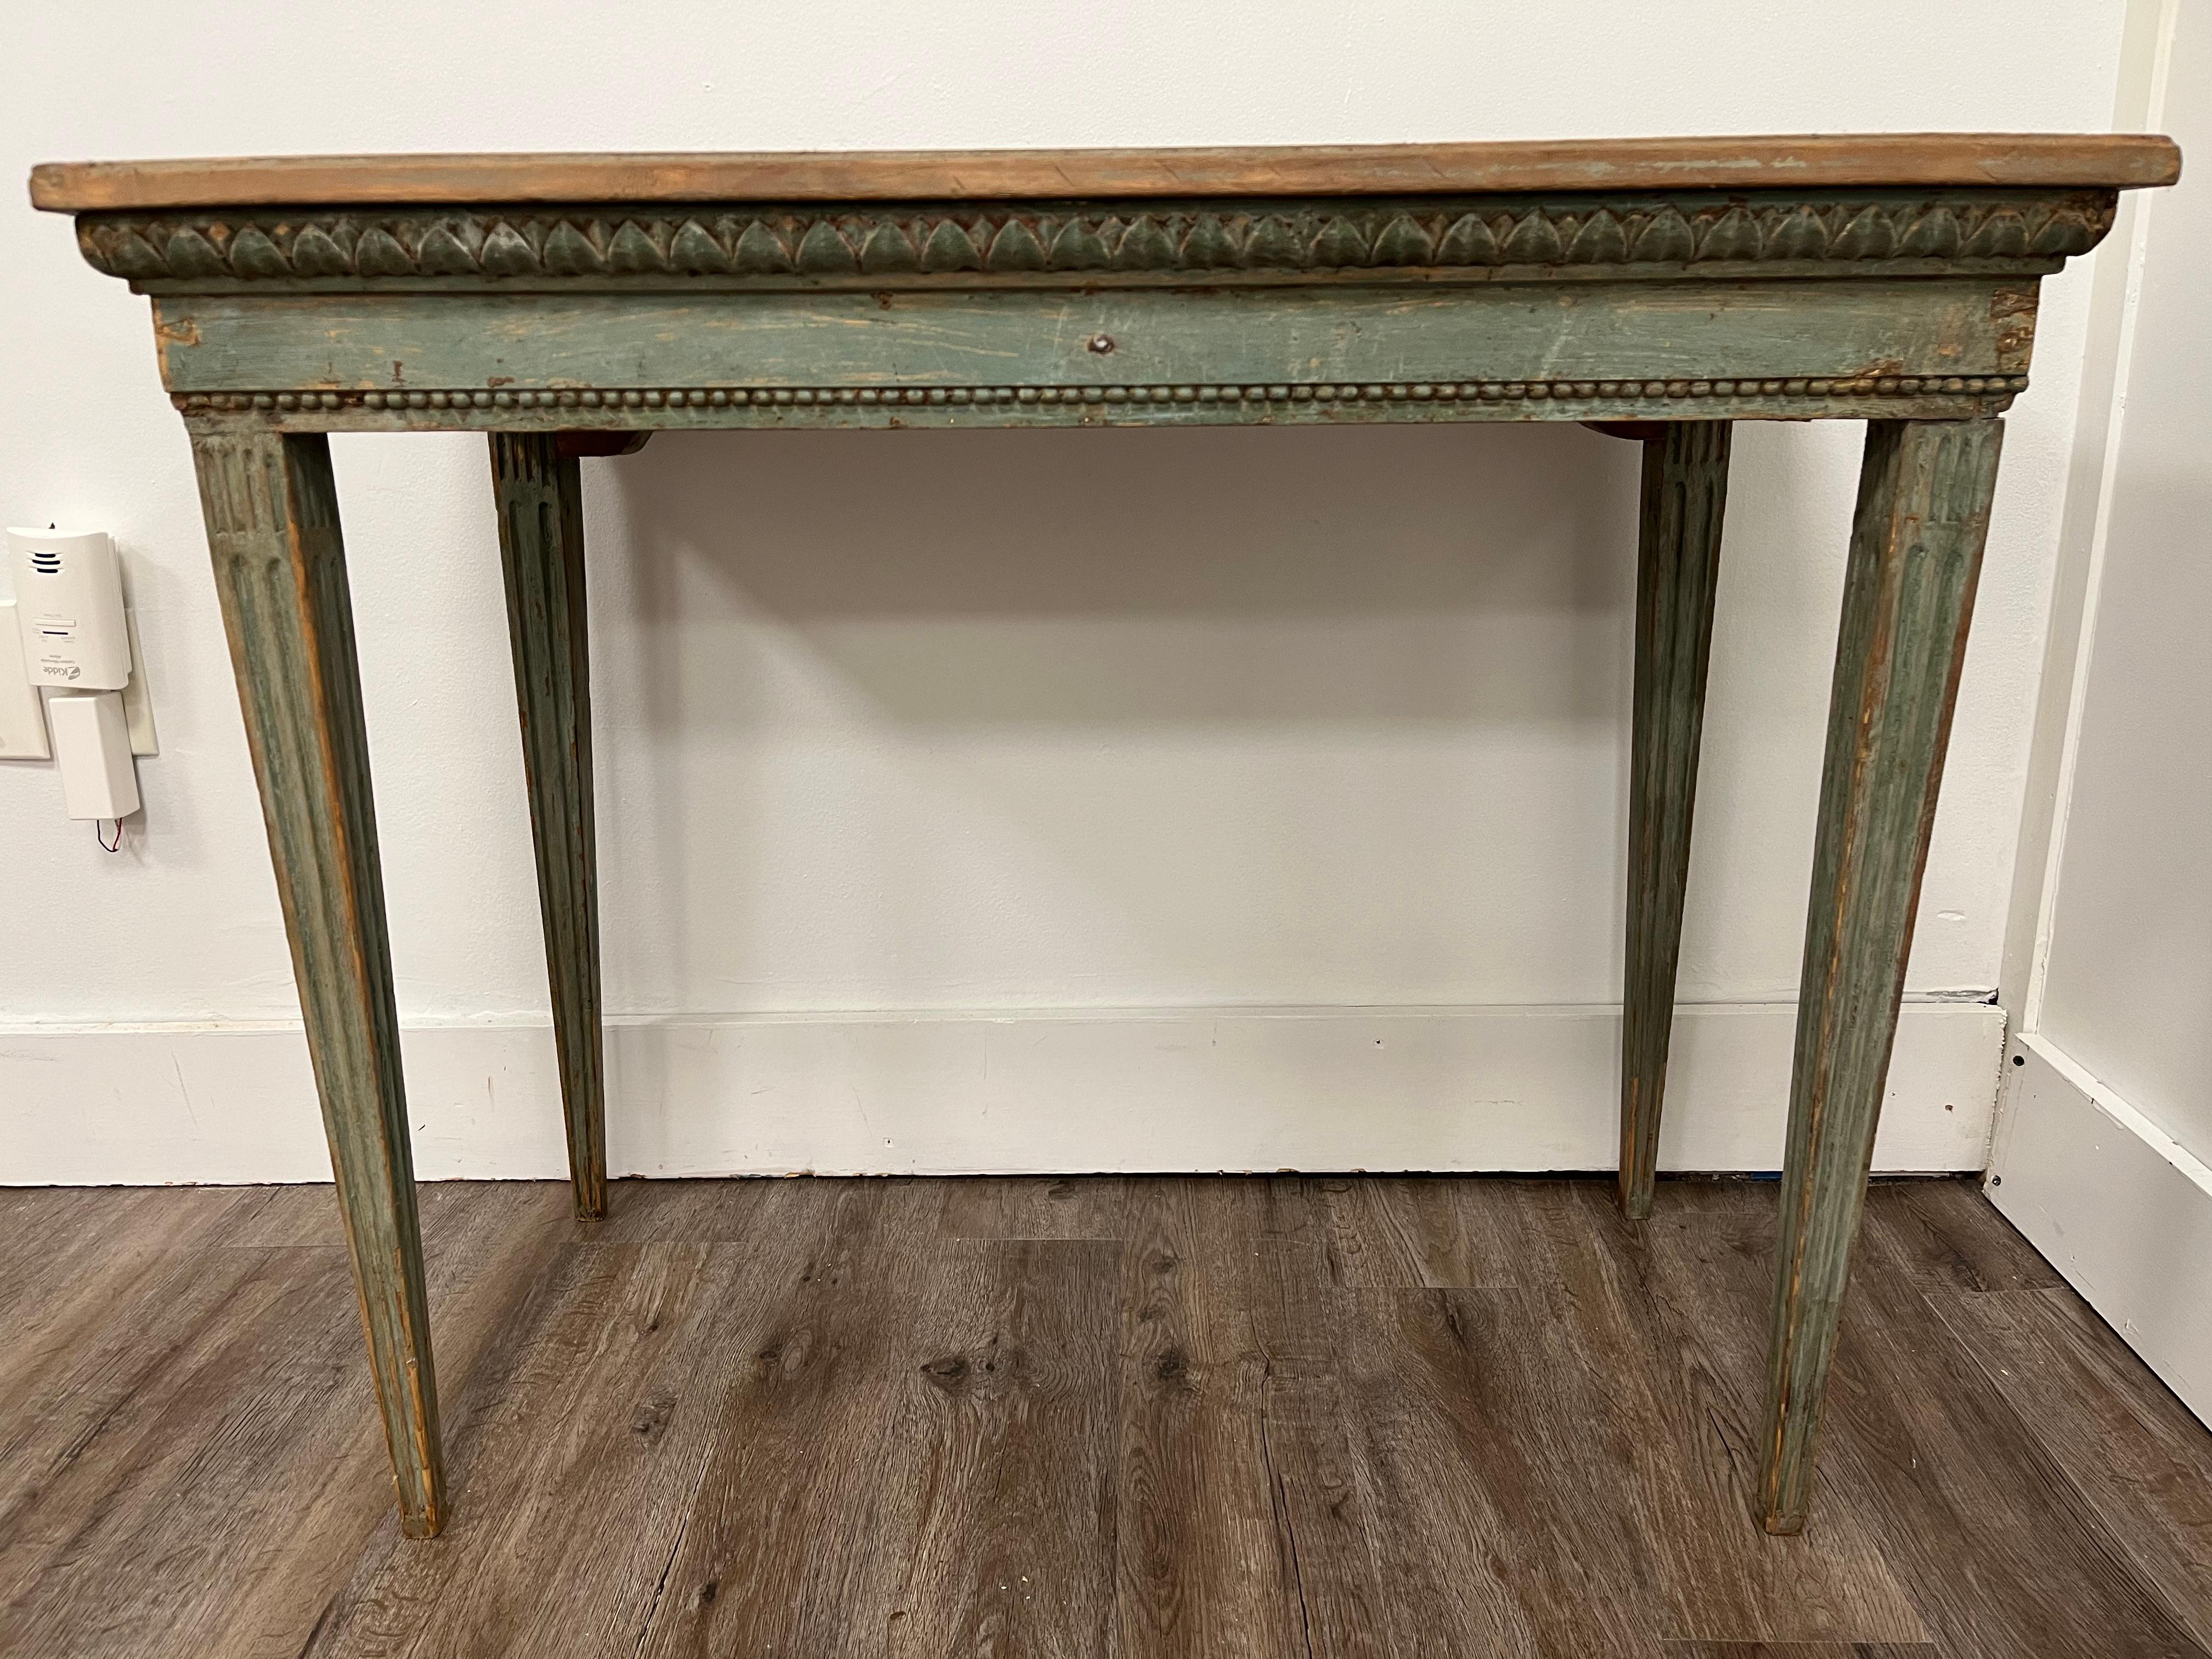 A Swedish Gustavian game table meticulously scraped to its original pale green color. Top removes to reveal original game board. Frame is decorated with intricate vertical leaf cut carvings and adorned with beaded details across the front and sides.